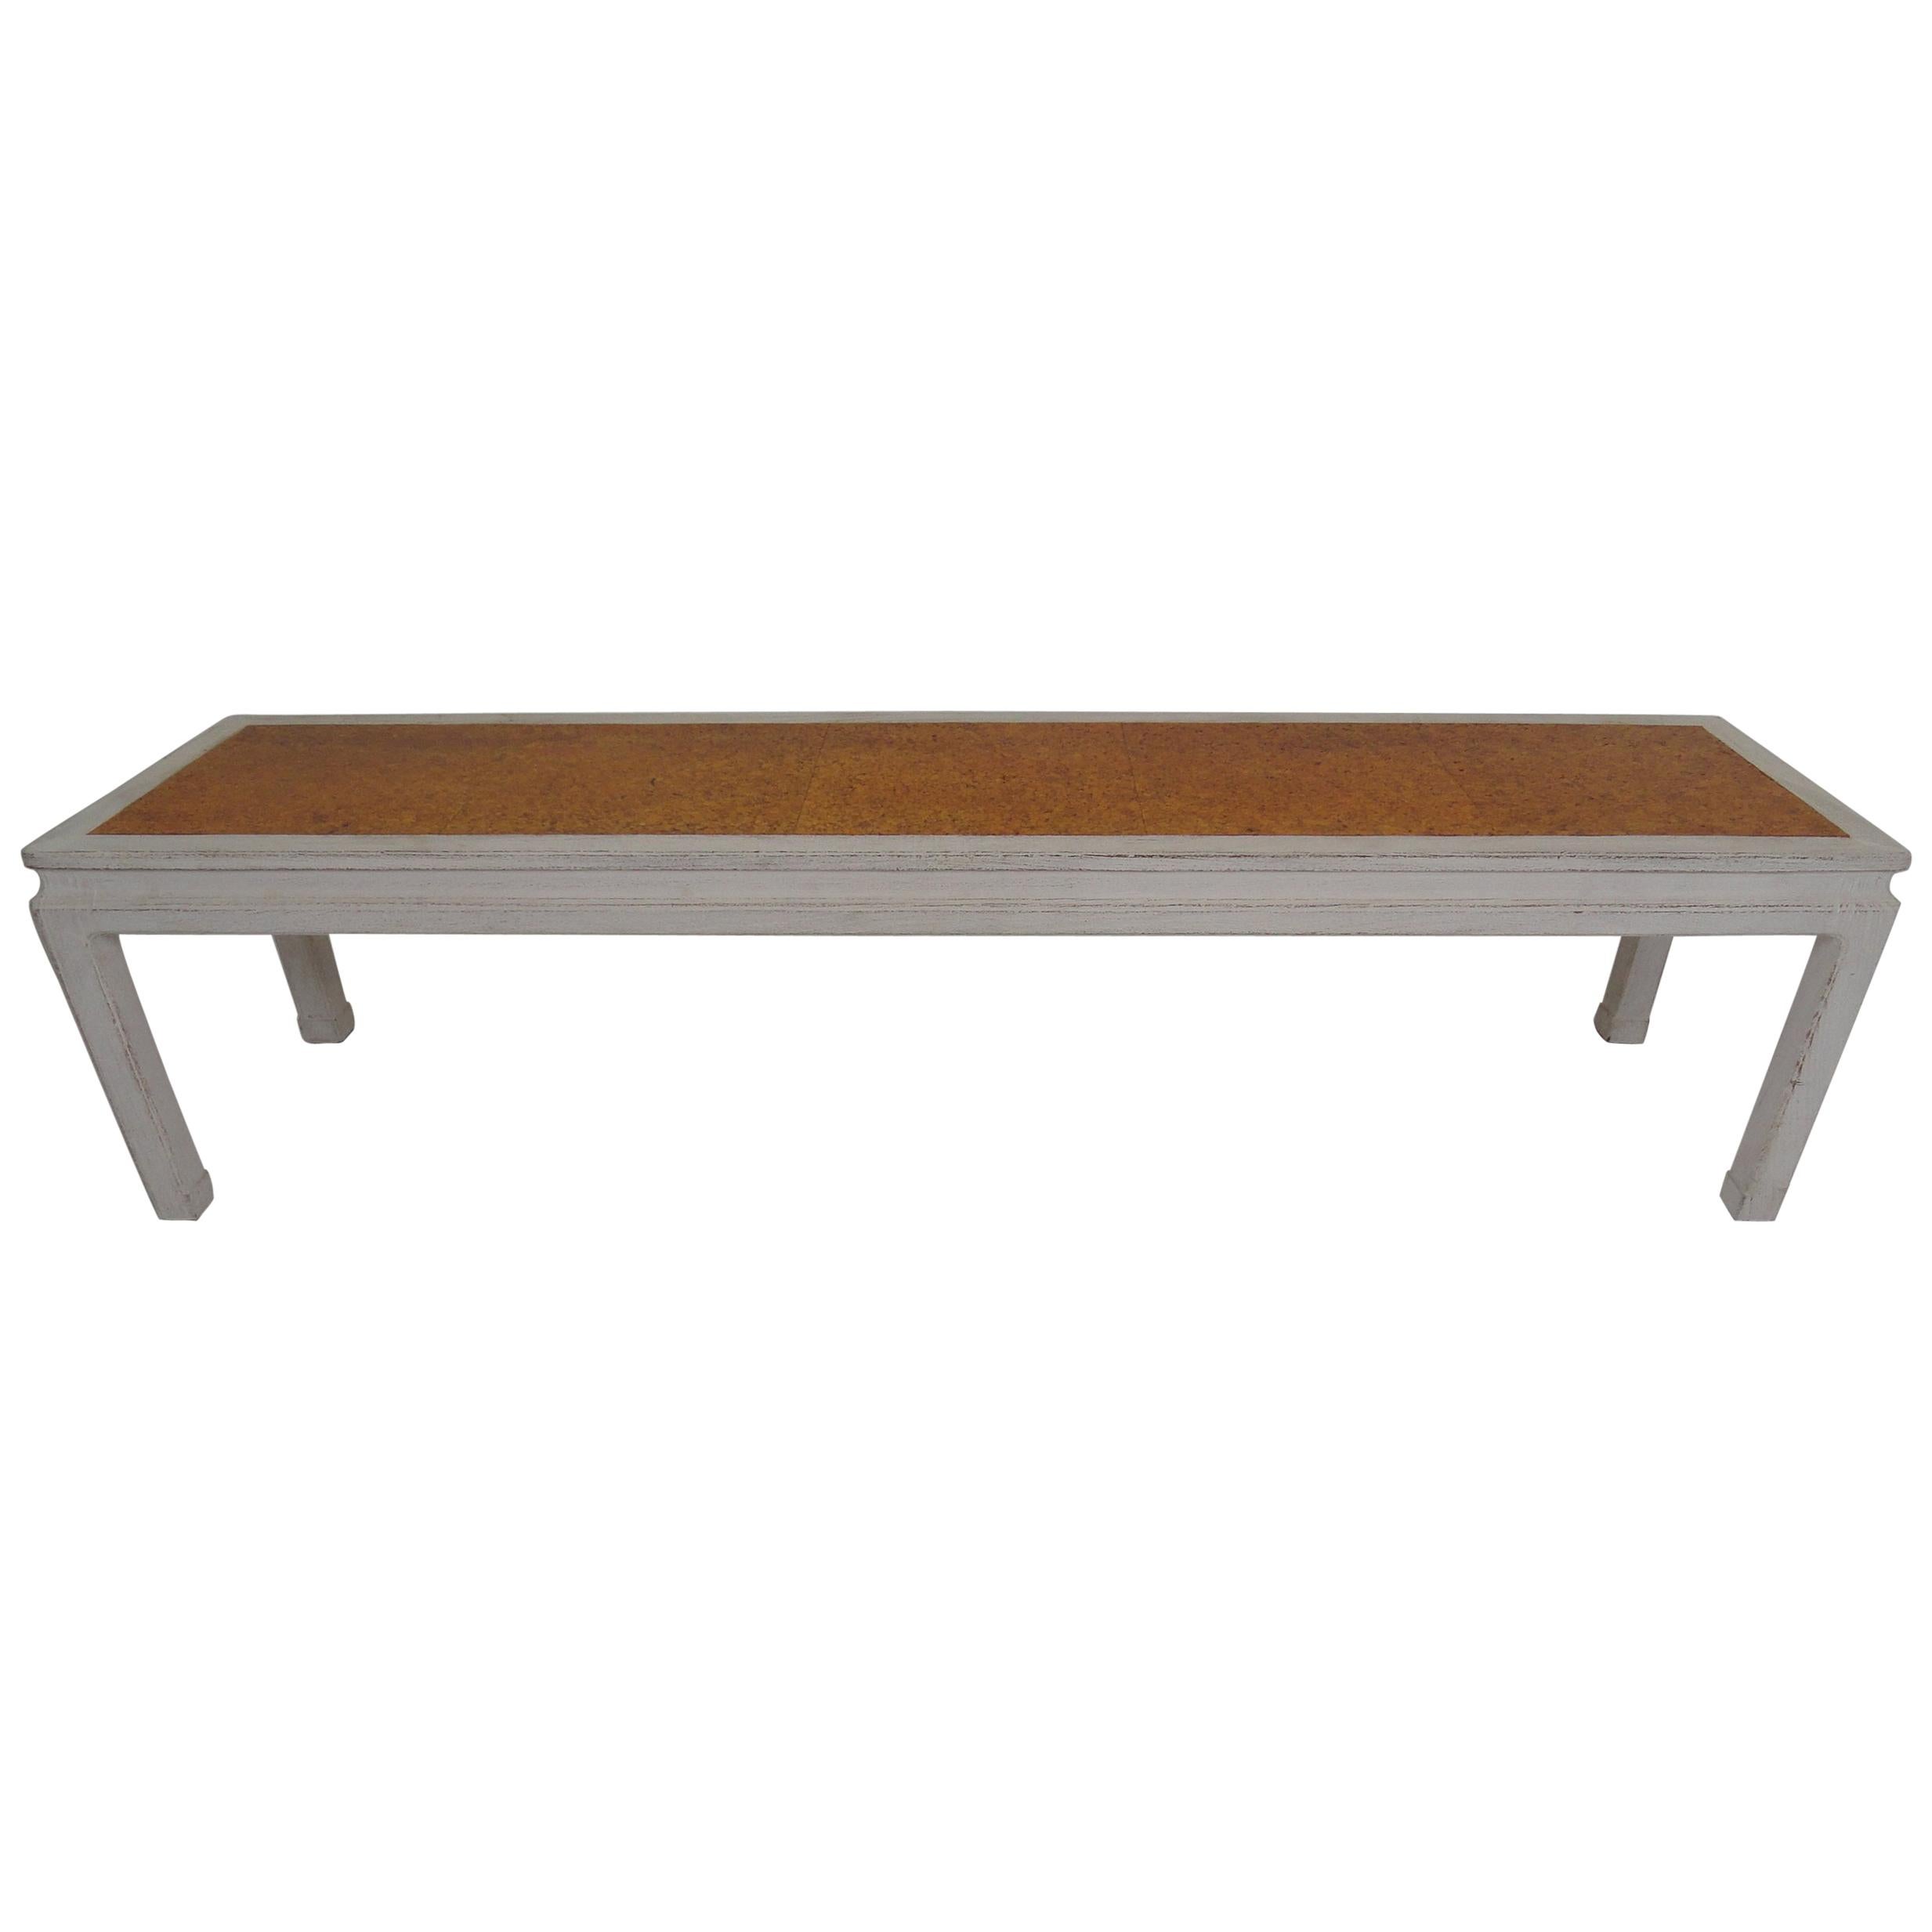 Edward Wormley for Dunbar Coffee Table with Inset Cork Top For Sale